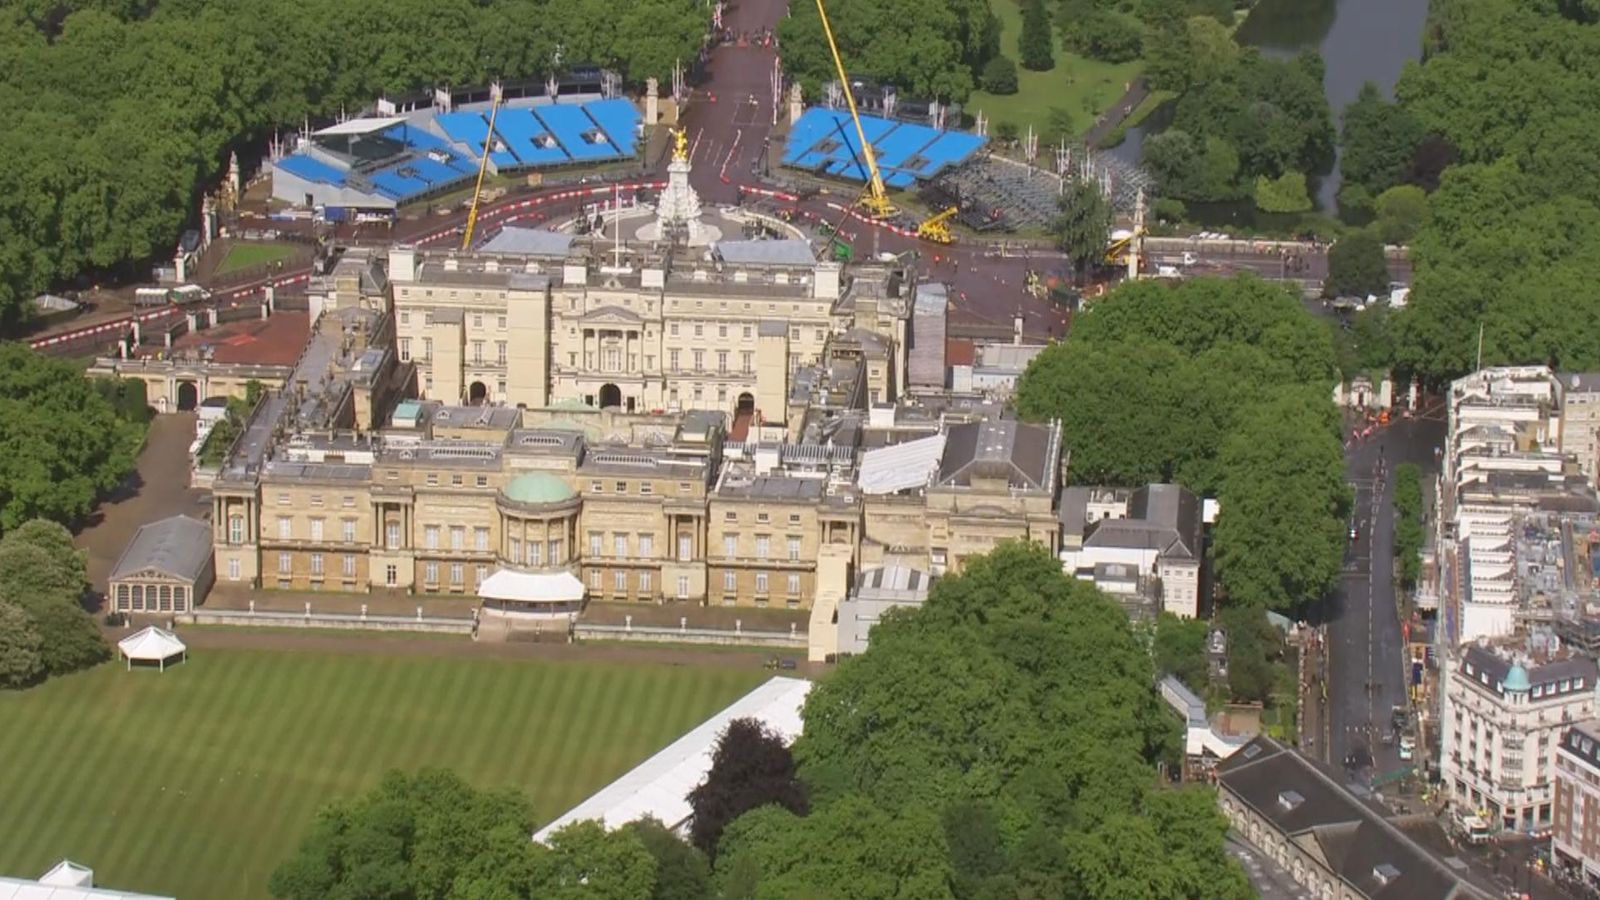 Buckingham Palace 'should be open all year to pay for its upkeep' UK